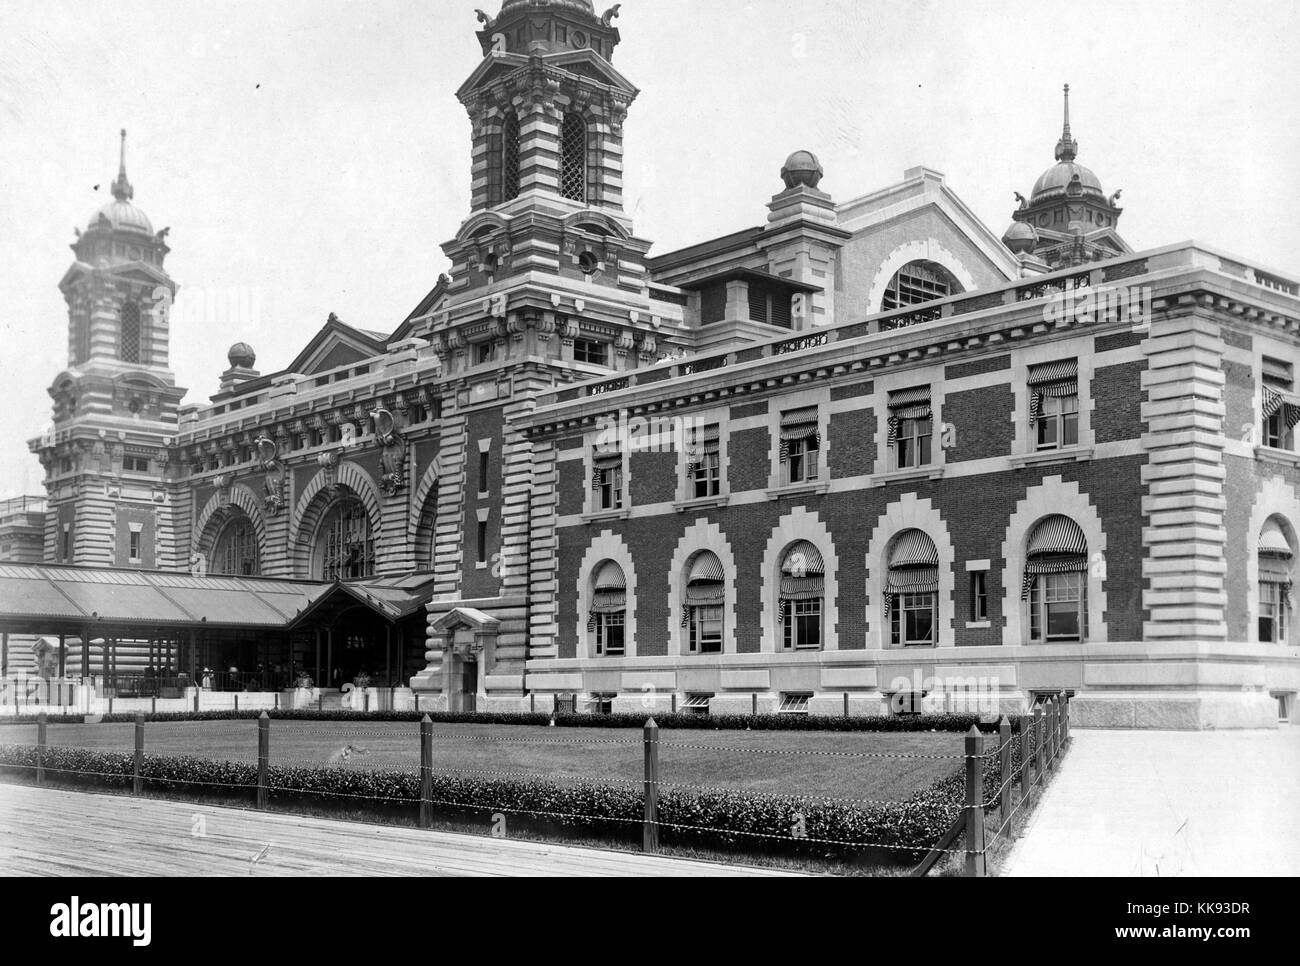 An exterior photograph of a portion of the Ellis Island immigration inspection station, the French Renaissance Revival building is constructed with red bricks and limestone trim, the building was first opened on December 17, 1900, it was closed in 1954 after processing over 12 million immigrants entering the United States, towers can be seen at the corners of the central portion of the structure with a covered walkway leading to main entrance, a large plot of grass is protected by a short fence and shrubs, wide walkways surround the grass and building, New York, 1907. From the New York Public  Stock Photo